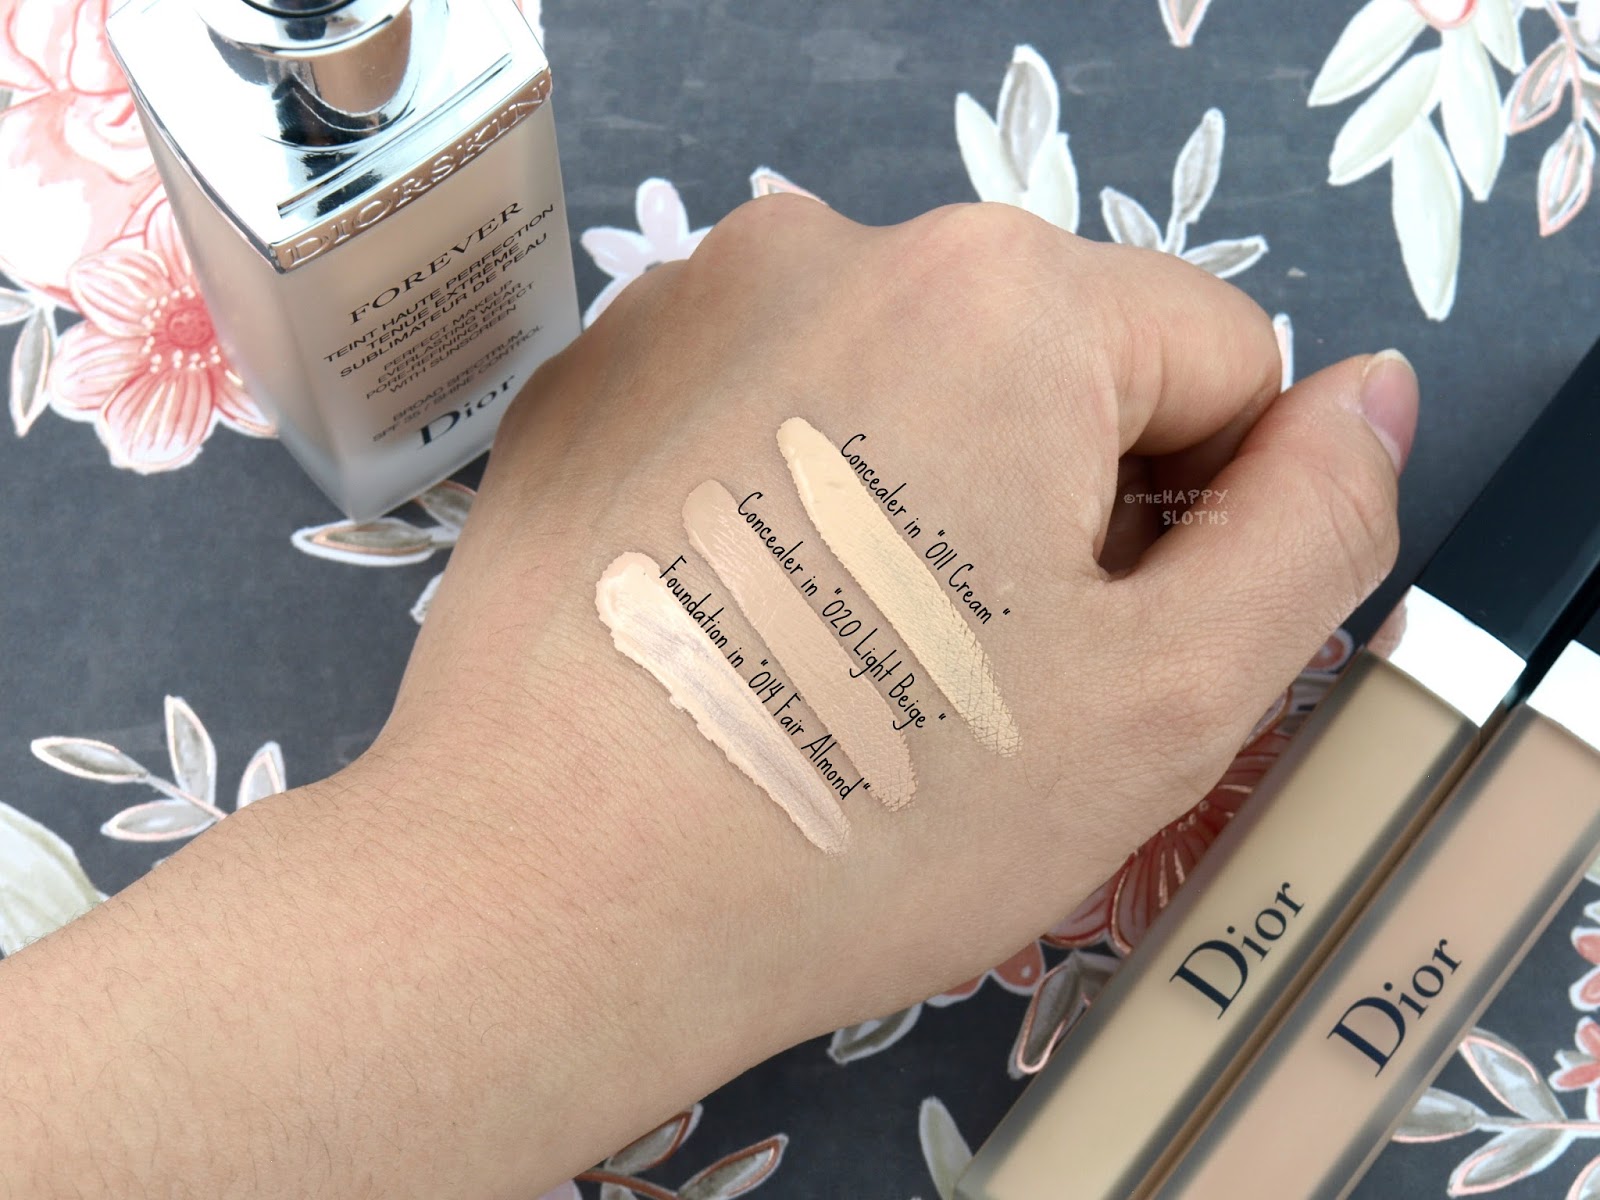 Dior Diorskin Forever Perfect Foundation in "014 Fair Almond" and Undercover Concealer in "011 Cream" & "020 Light Beige": Review and Swatches